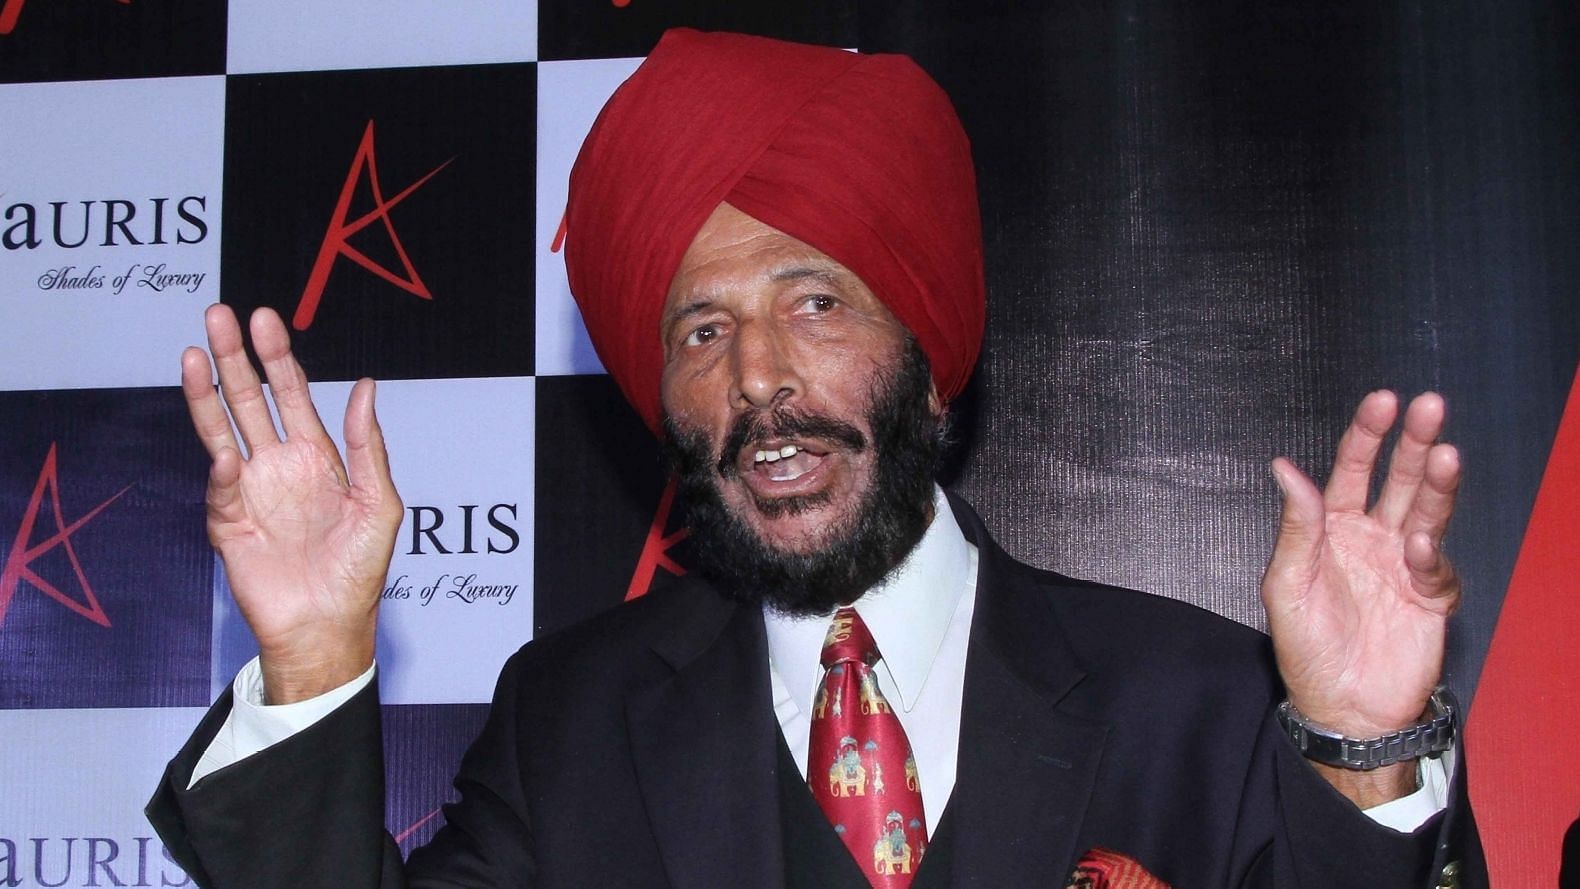 Milkha Singh’s condition is said to be stable after he was re-hospitalised earlier this week.